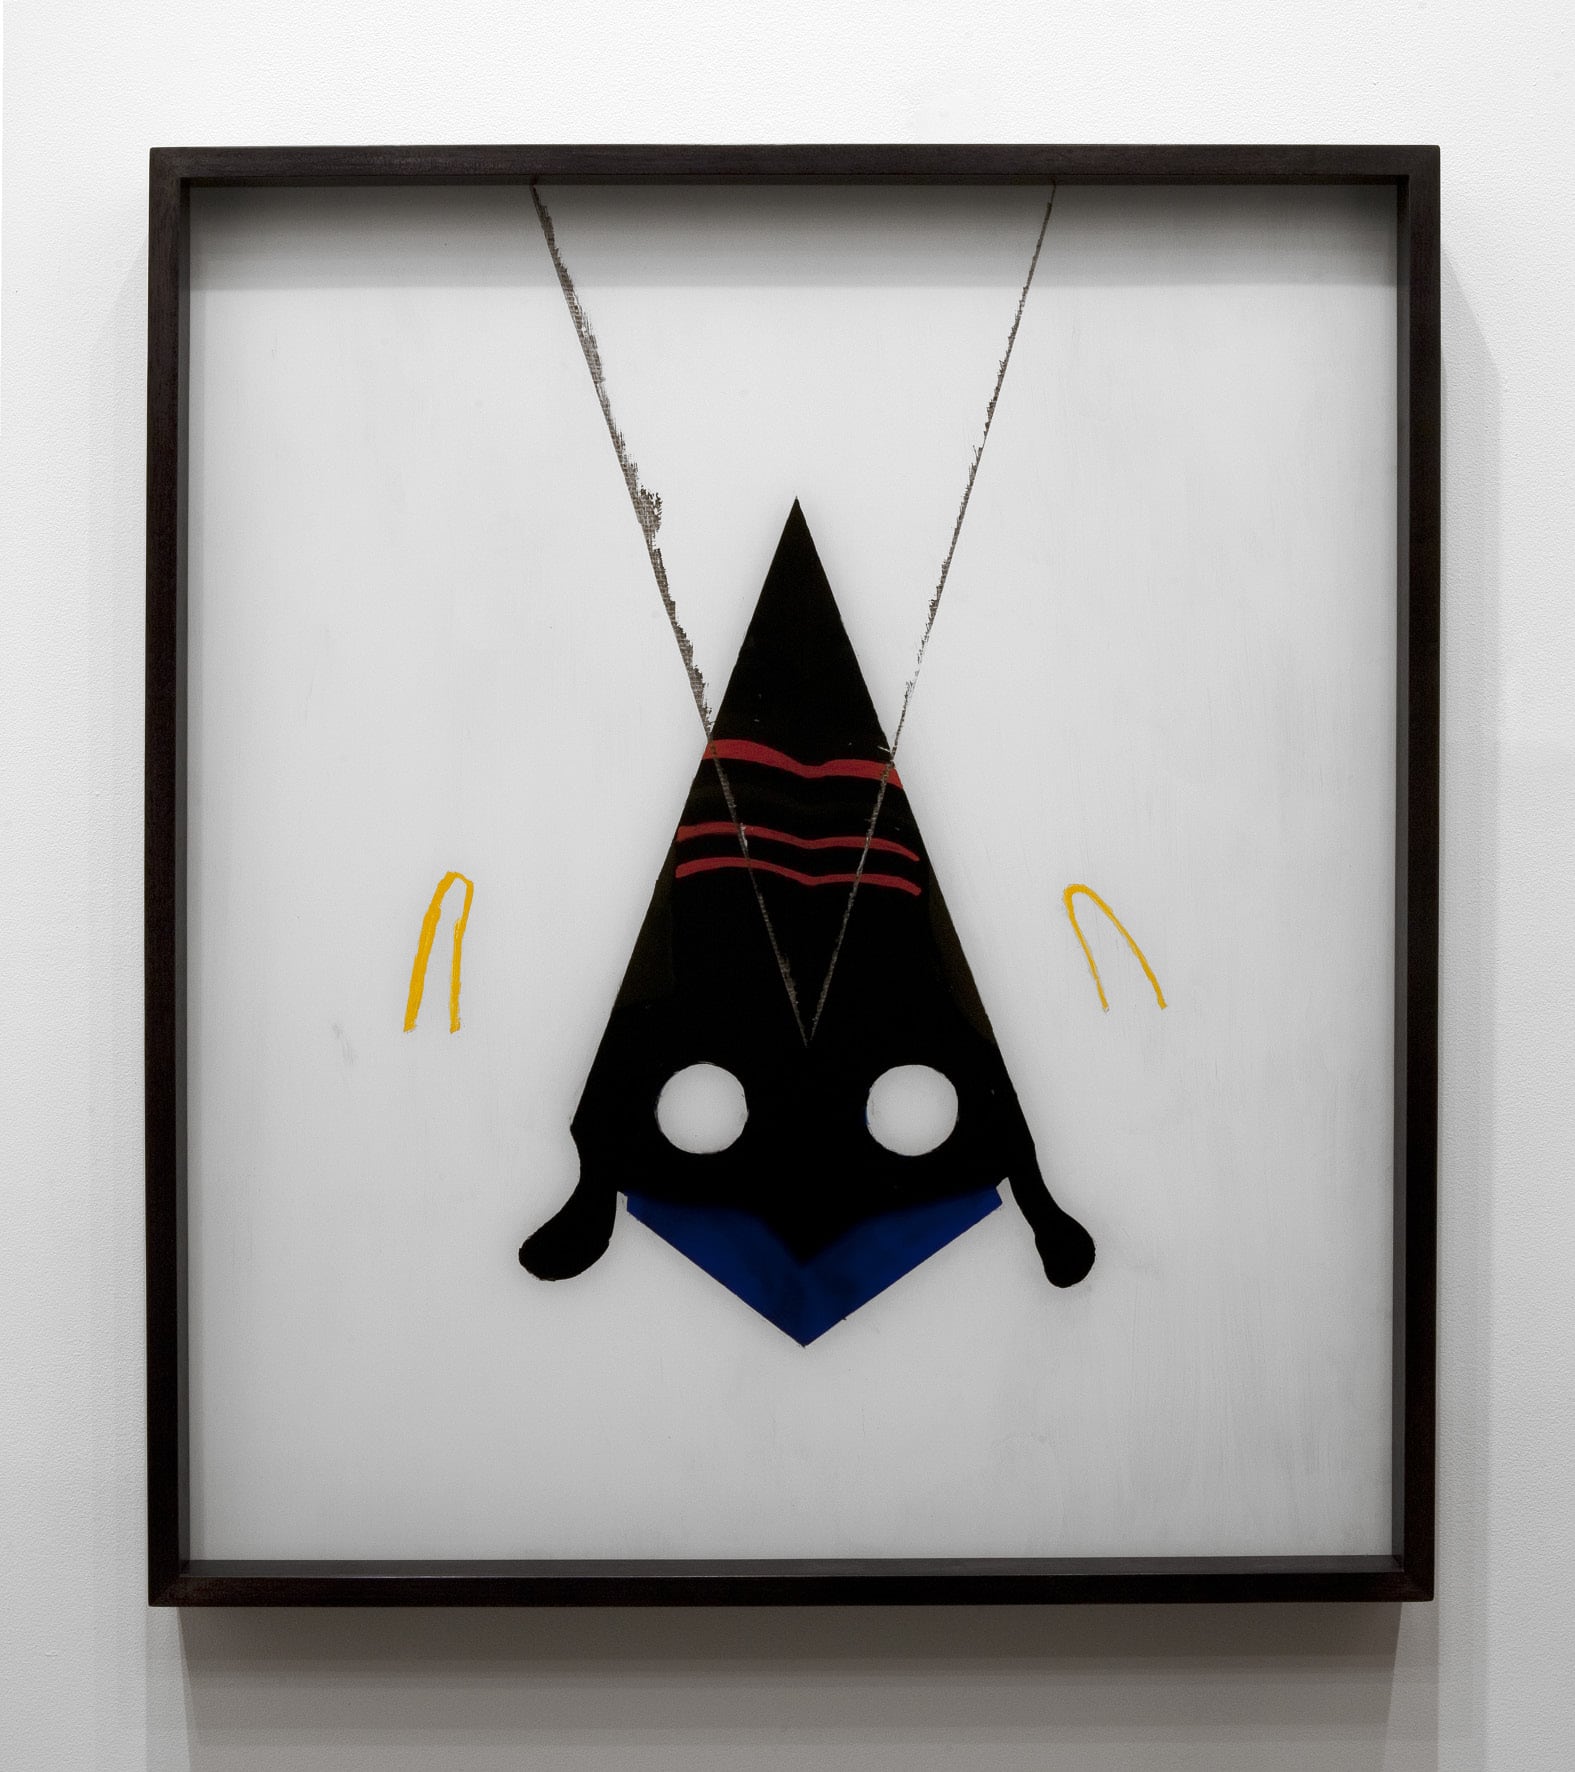 Clare Milledge, Banana Mask 2013, oil on tempered glass, frame, 84 × 72.25 × 6 cm,image courtesy the artist and The Commercial Gallery, Sydney, photograph: Jessica Maurer